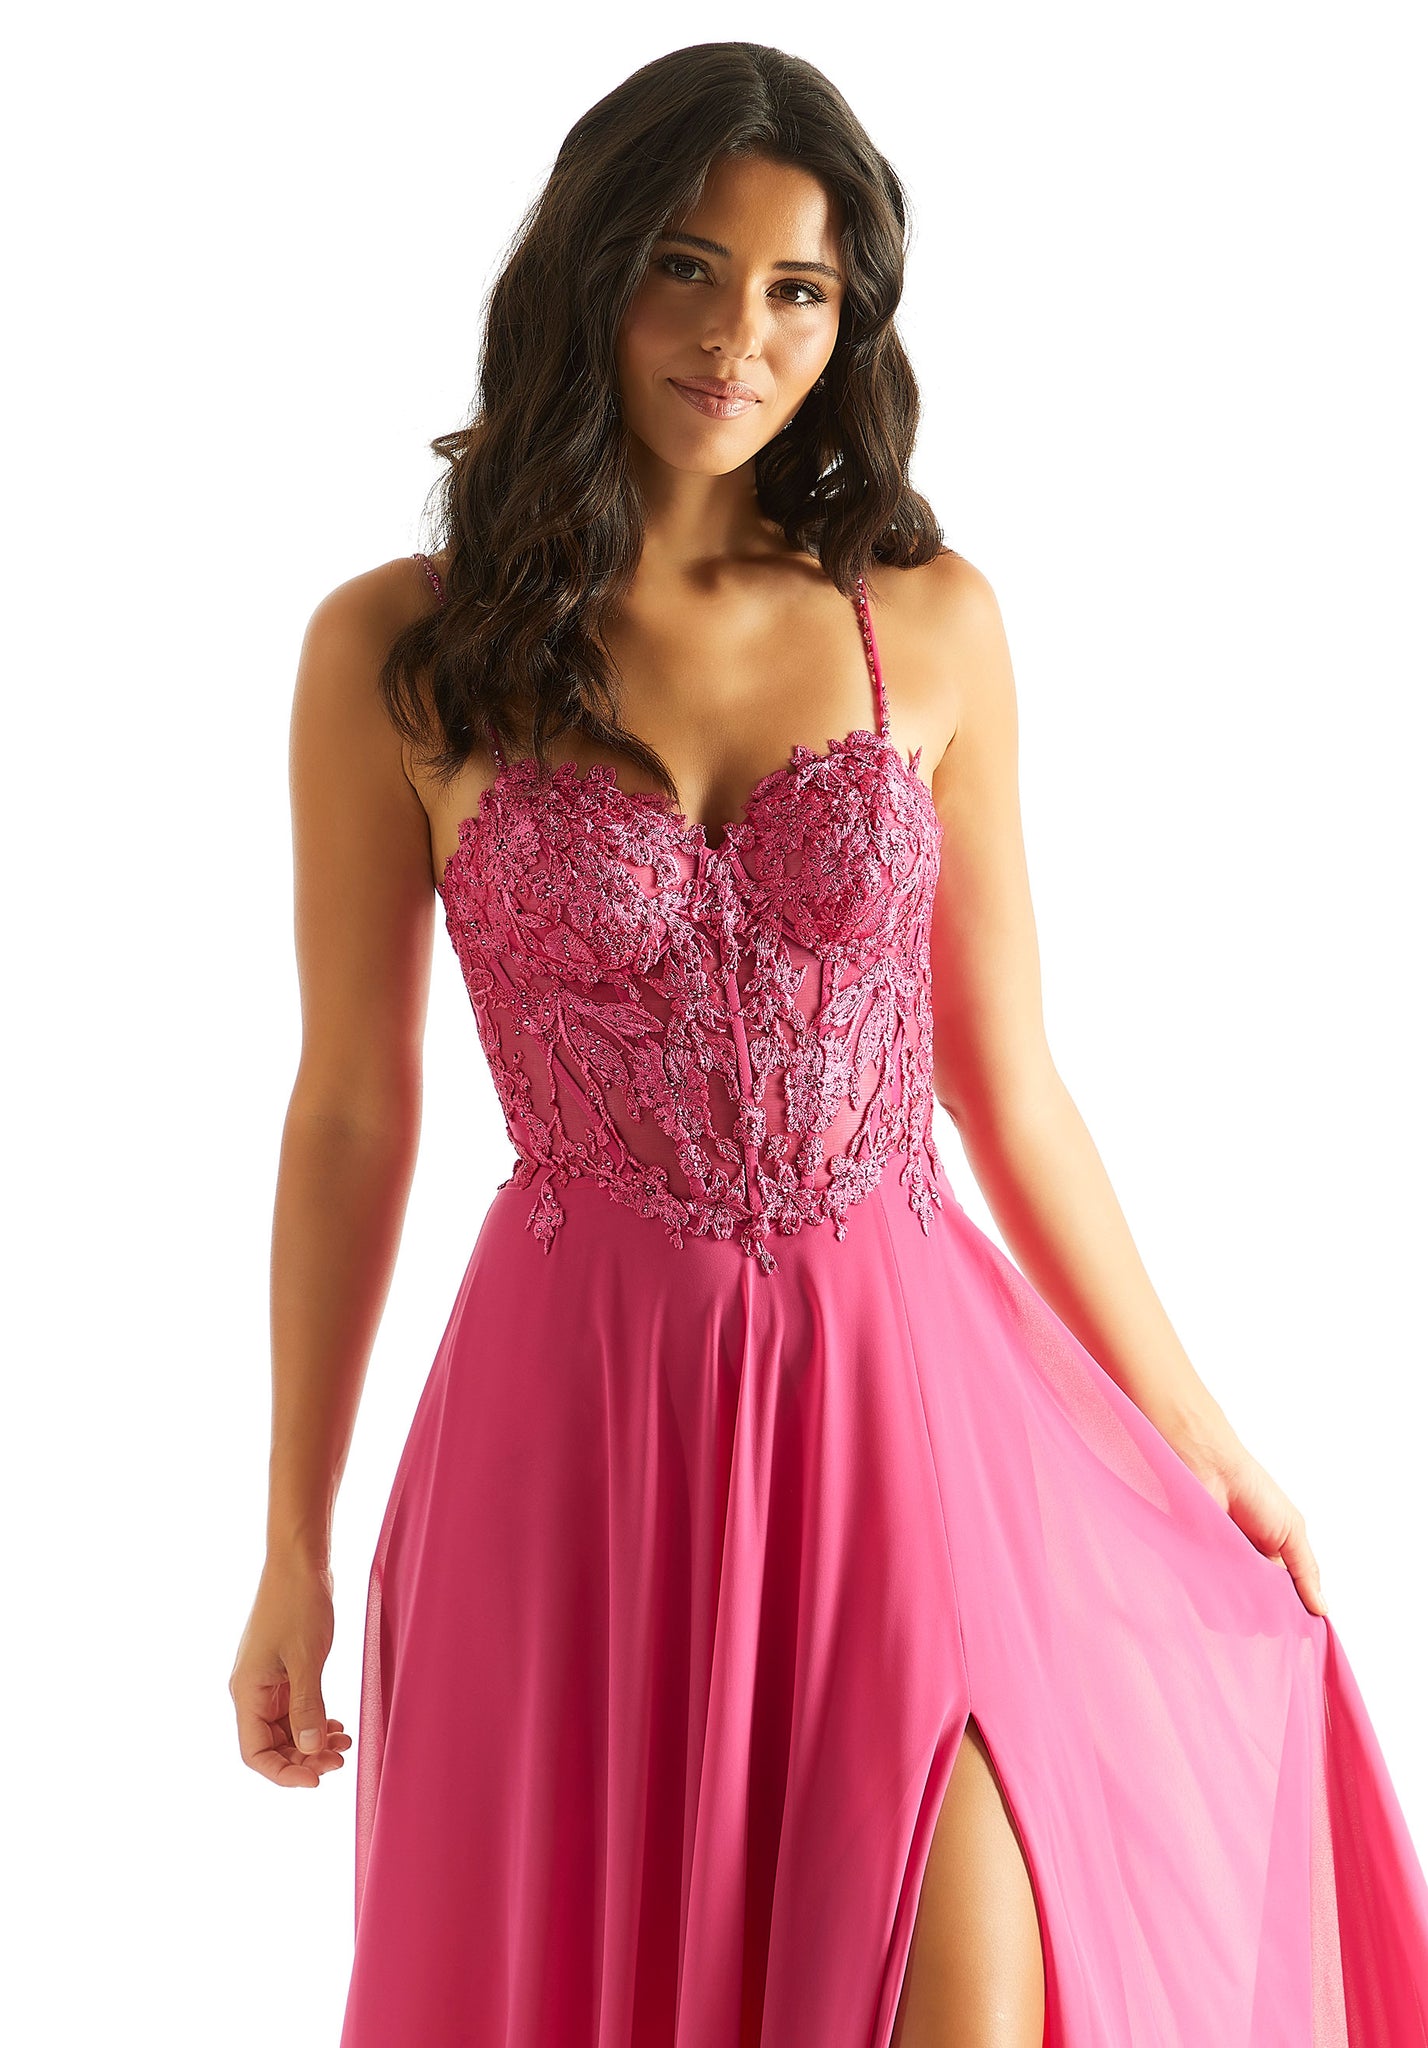 Exude confidence in this romantic and flattering Morilee A-line prom dress 49056. Ornate symmetrically sewn beaded appliques are featured symmetrically throughout the corset bodice that can be cinched and adjusted to your liking with the trendy corset lace up featured on the back. The flowy chiffon skirt features a thigh high slit with a sweep train.